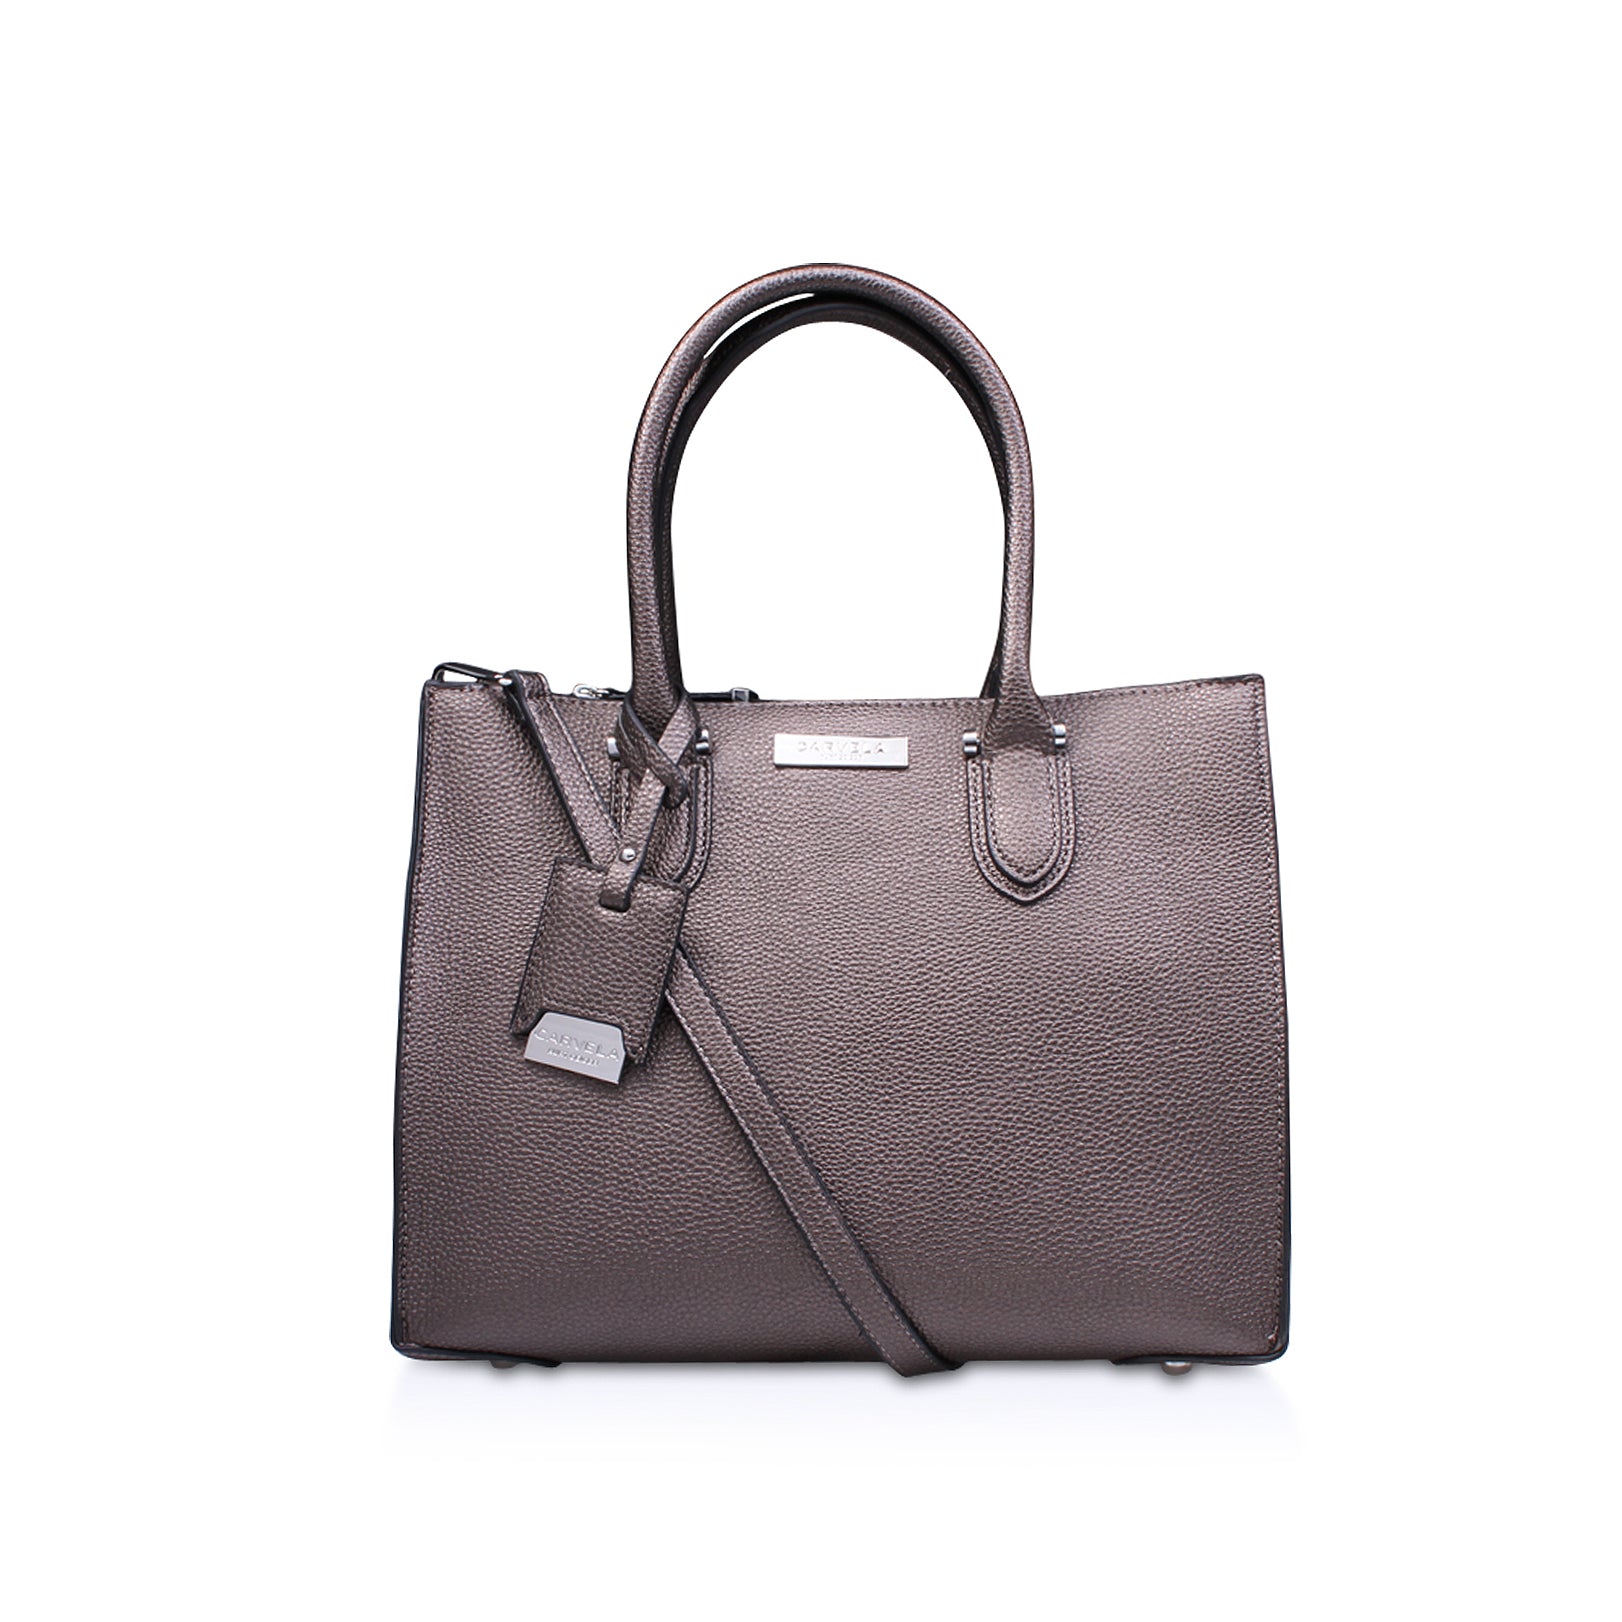 Structured Leather Tote Bag Atlas Carryall Handmade by Quiddity